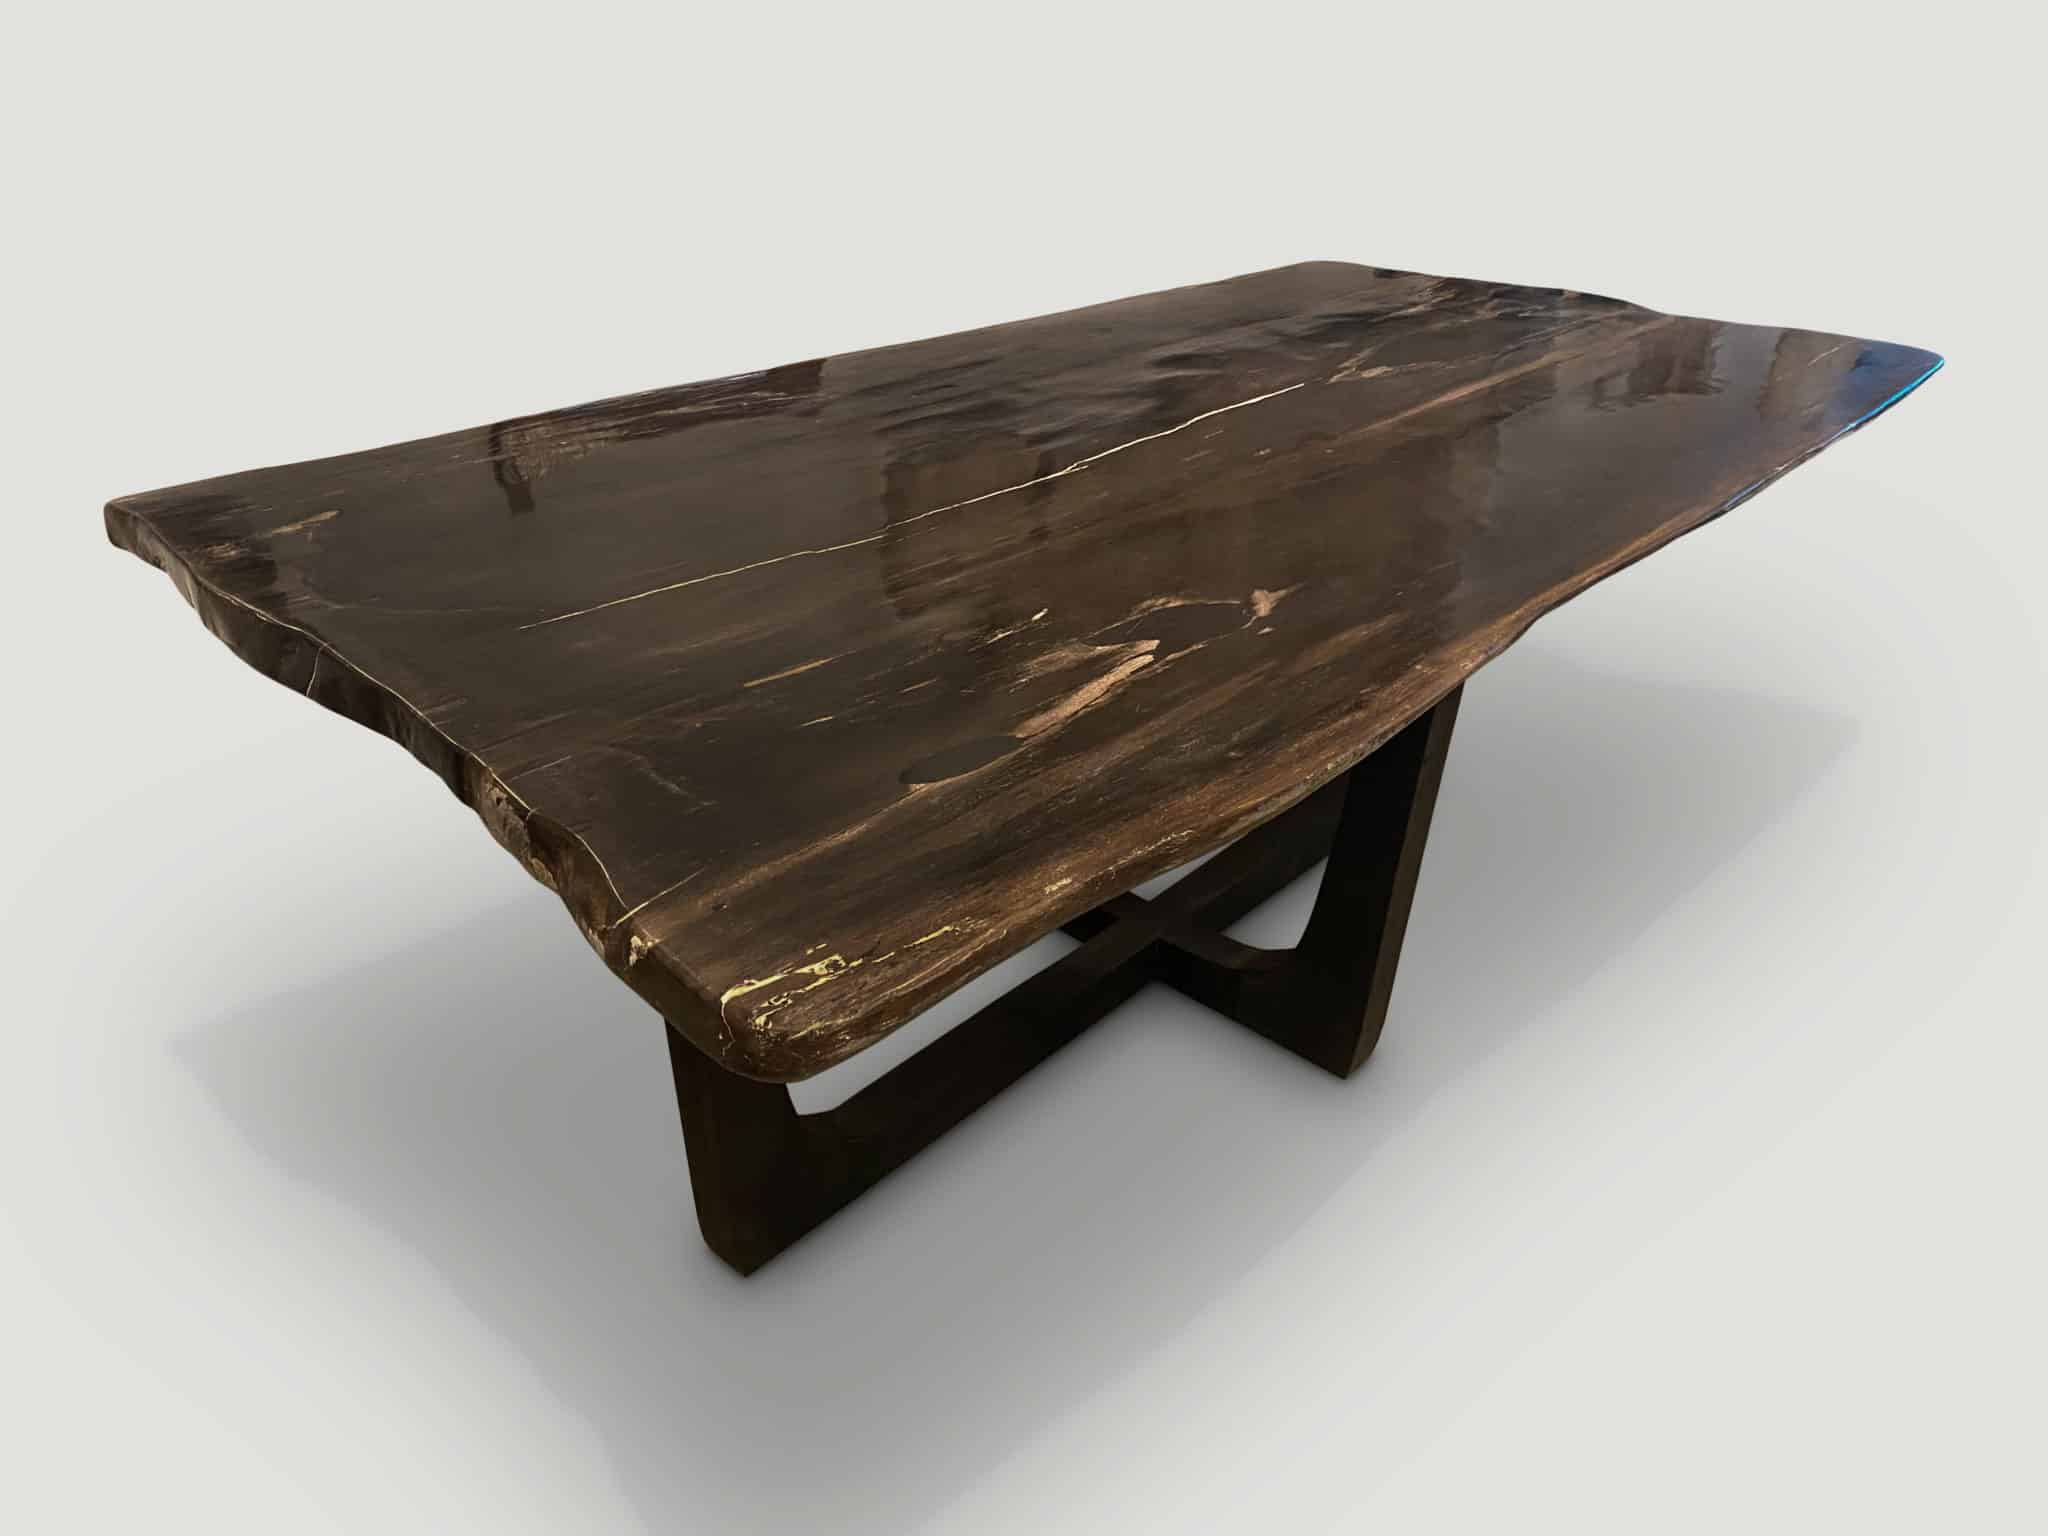 High quality petrified wood live edge dining table, coffee table or counter top